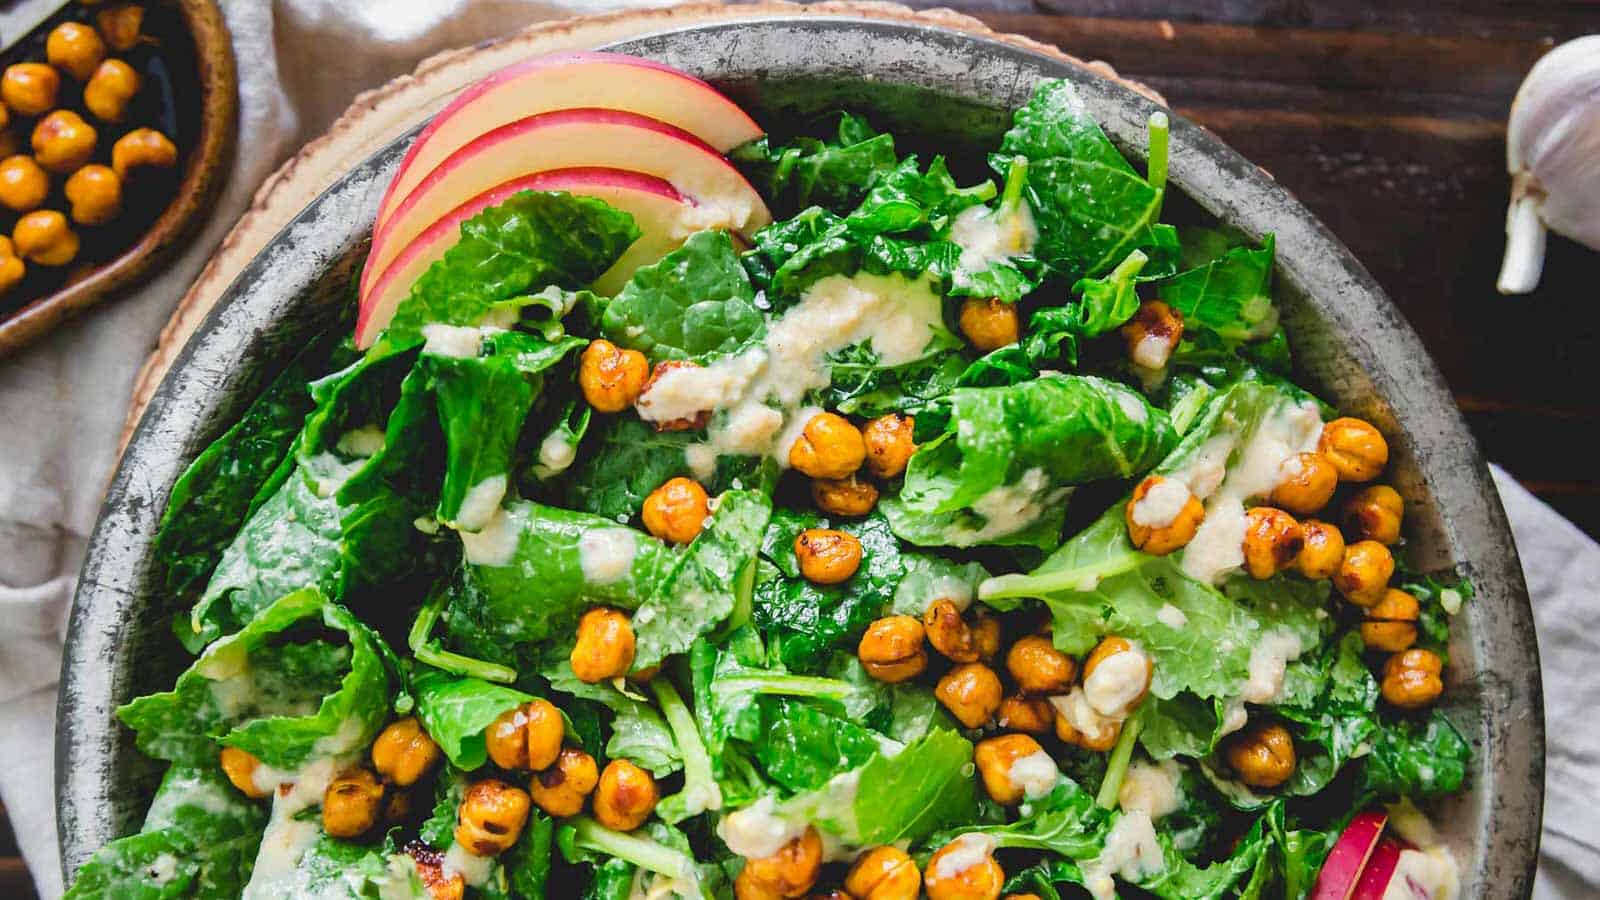 Baby kale salad in a metal plate with apples and roasted chickpeas.